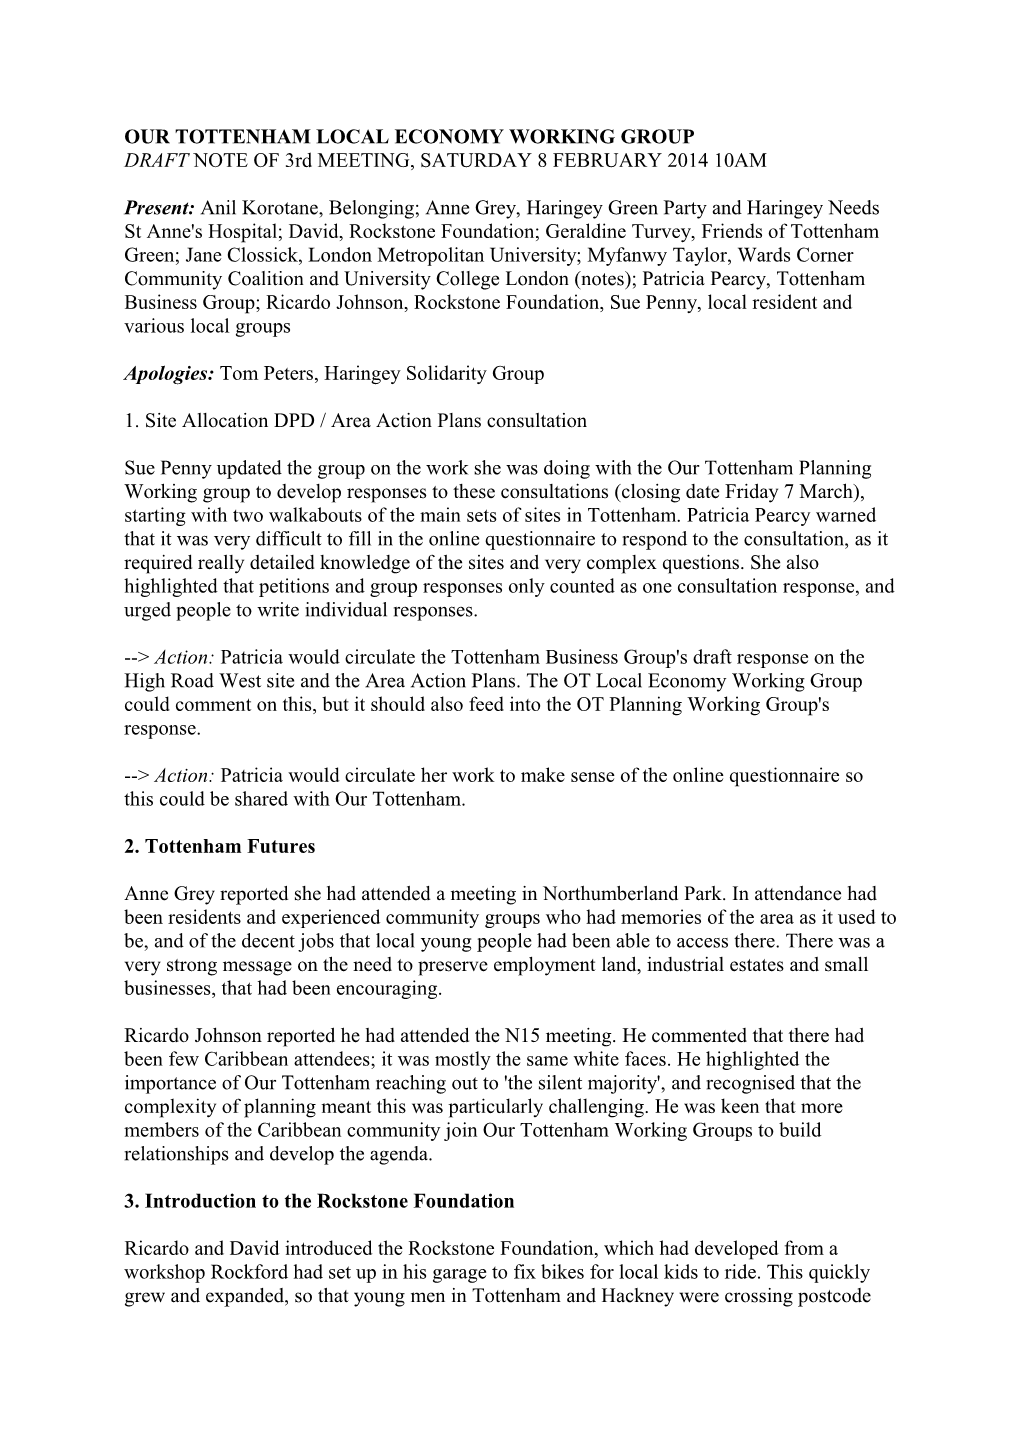 OUR TOTTENHAM LOCAL ECONOMY WORKING GROUP DRAFT NOTE of 3Rd MEETING, SATURDAY 8 FEBRUARY